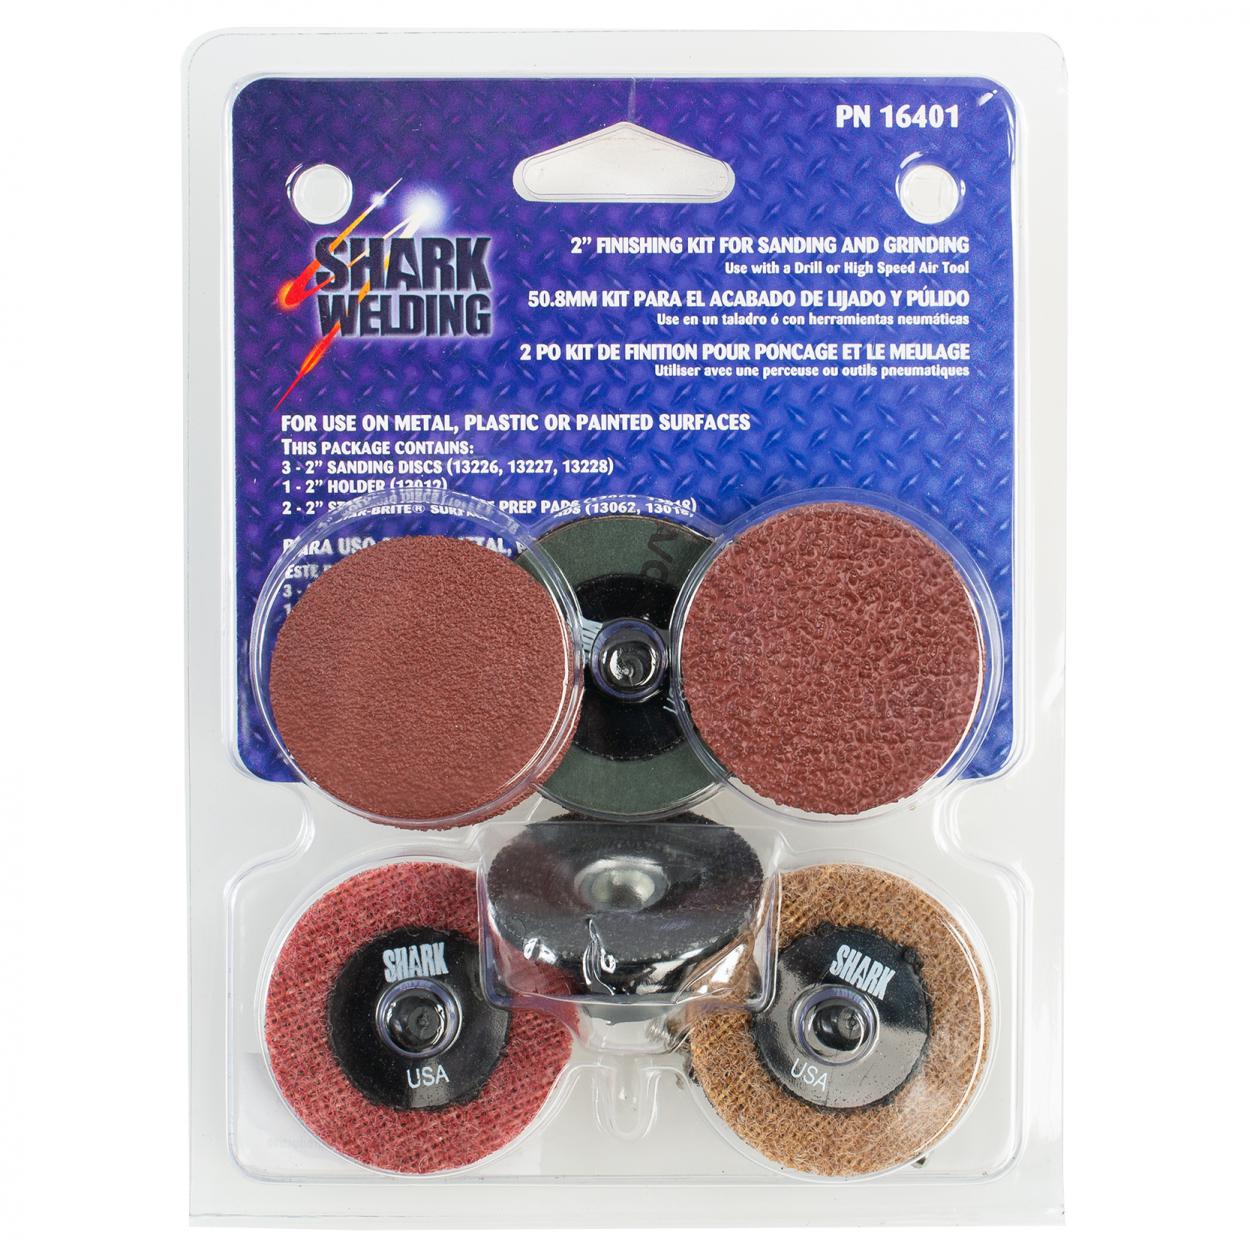 SHARK 2 Inch Finishing Kit for Sanding and Grinding 24,36 and 50 Grit w/Disc Holder Made in U.S.A.